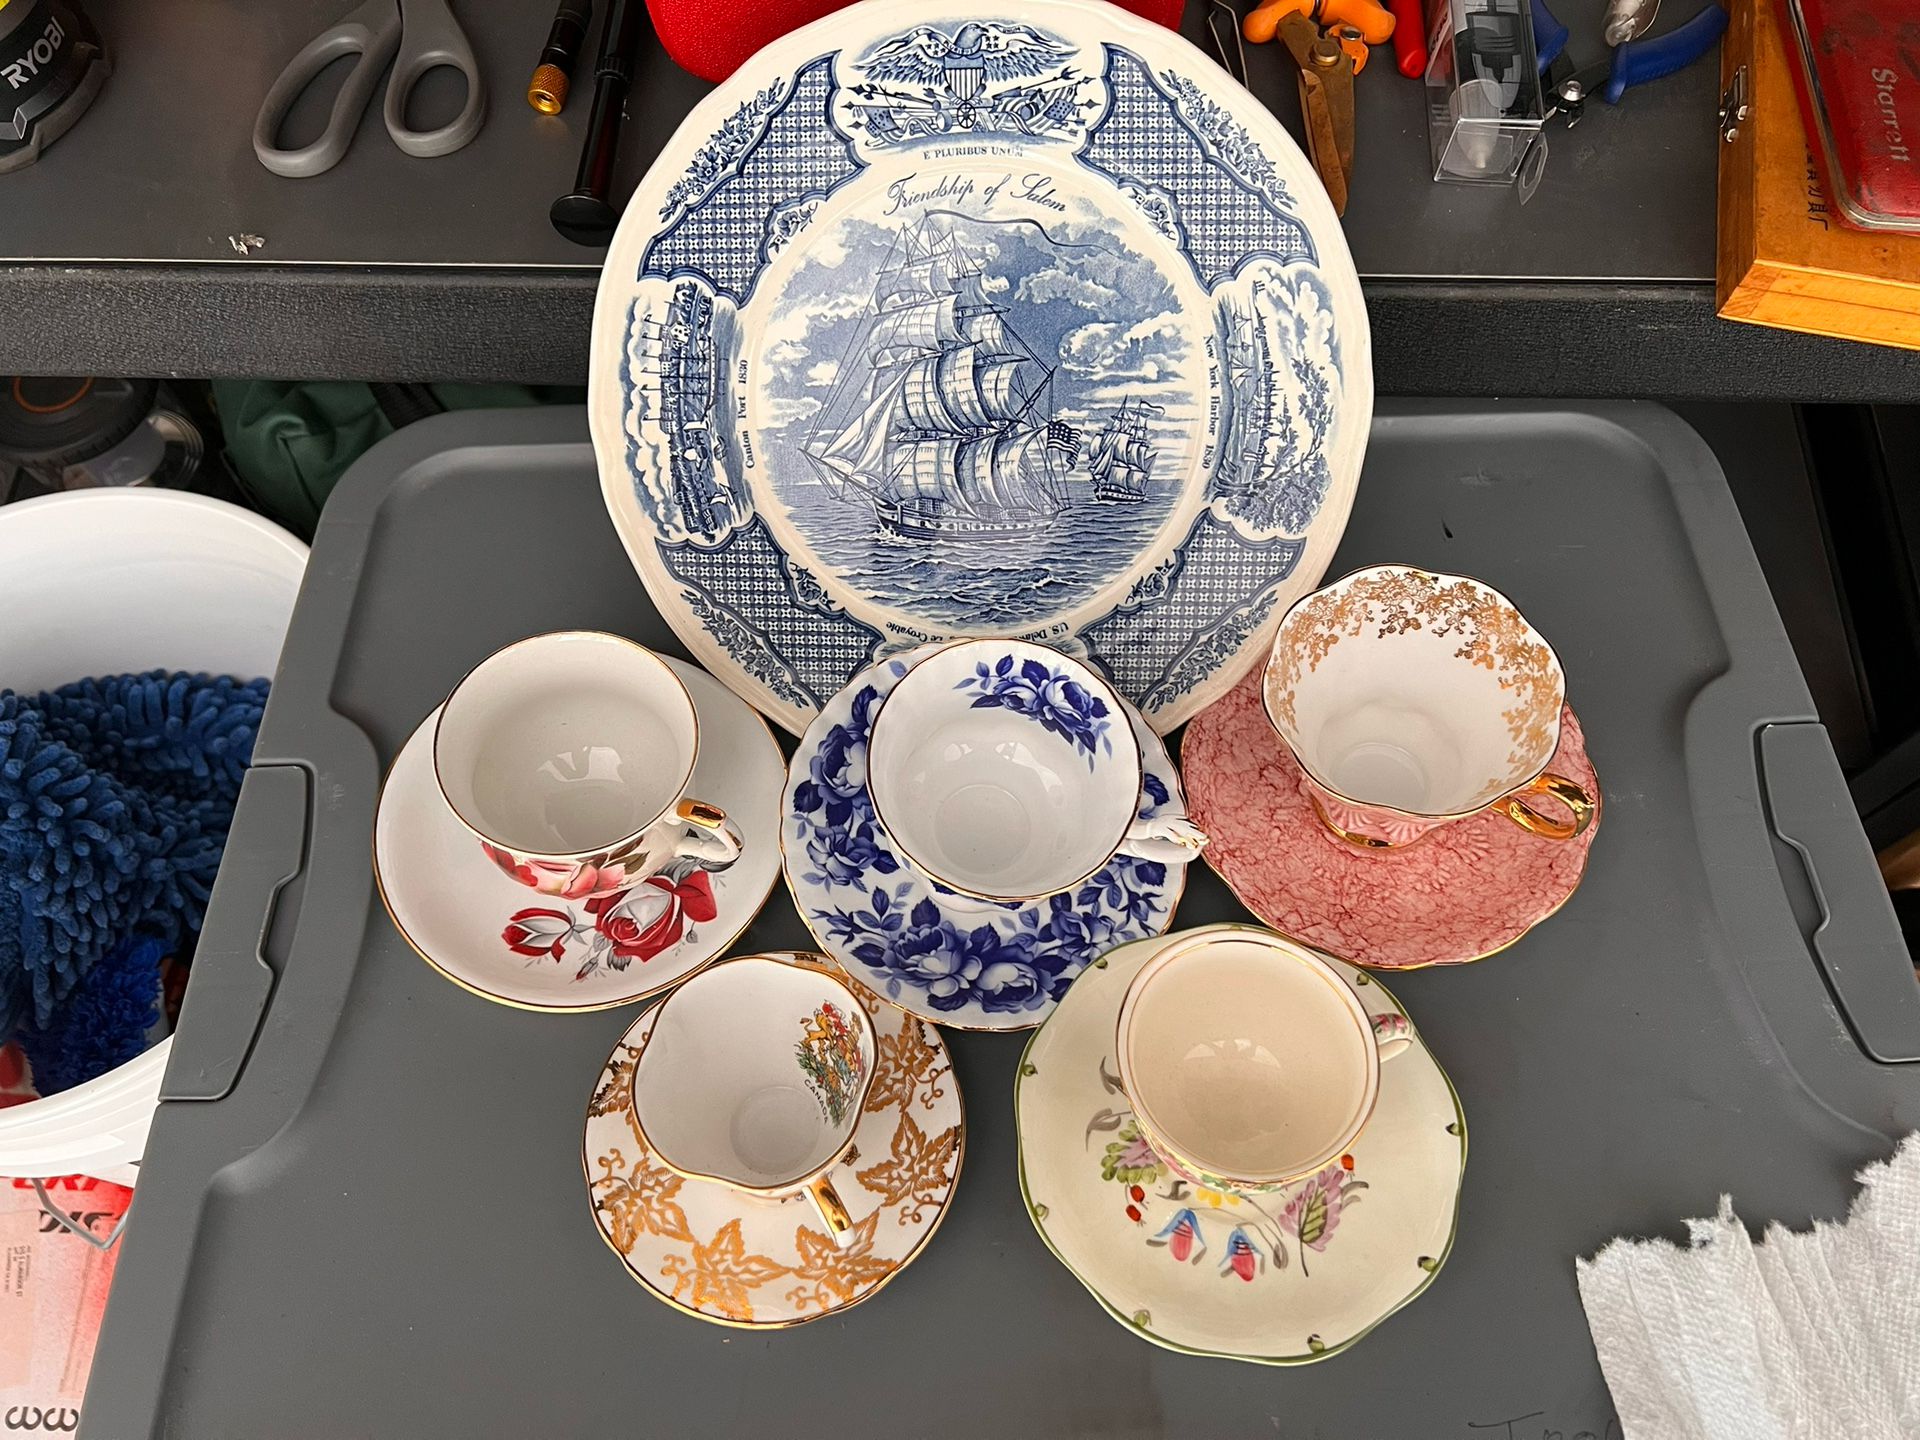 Fine China Tea Cups and Plate